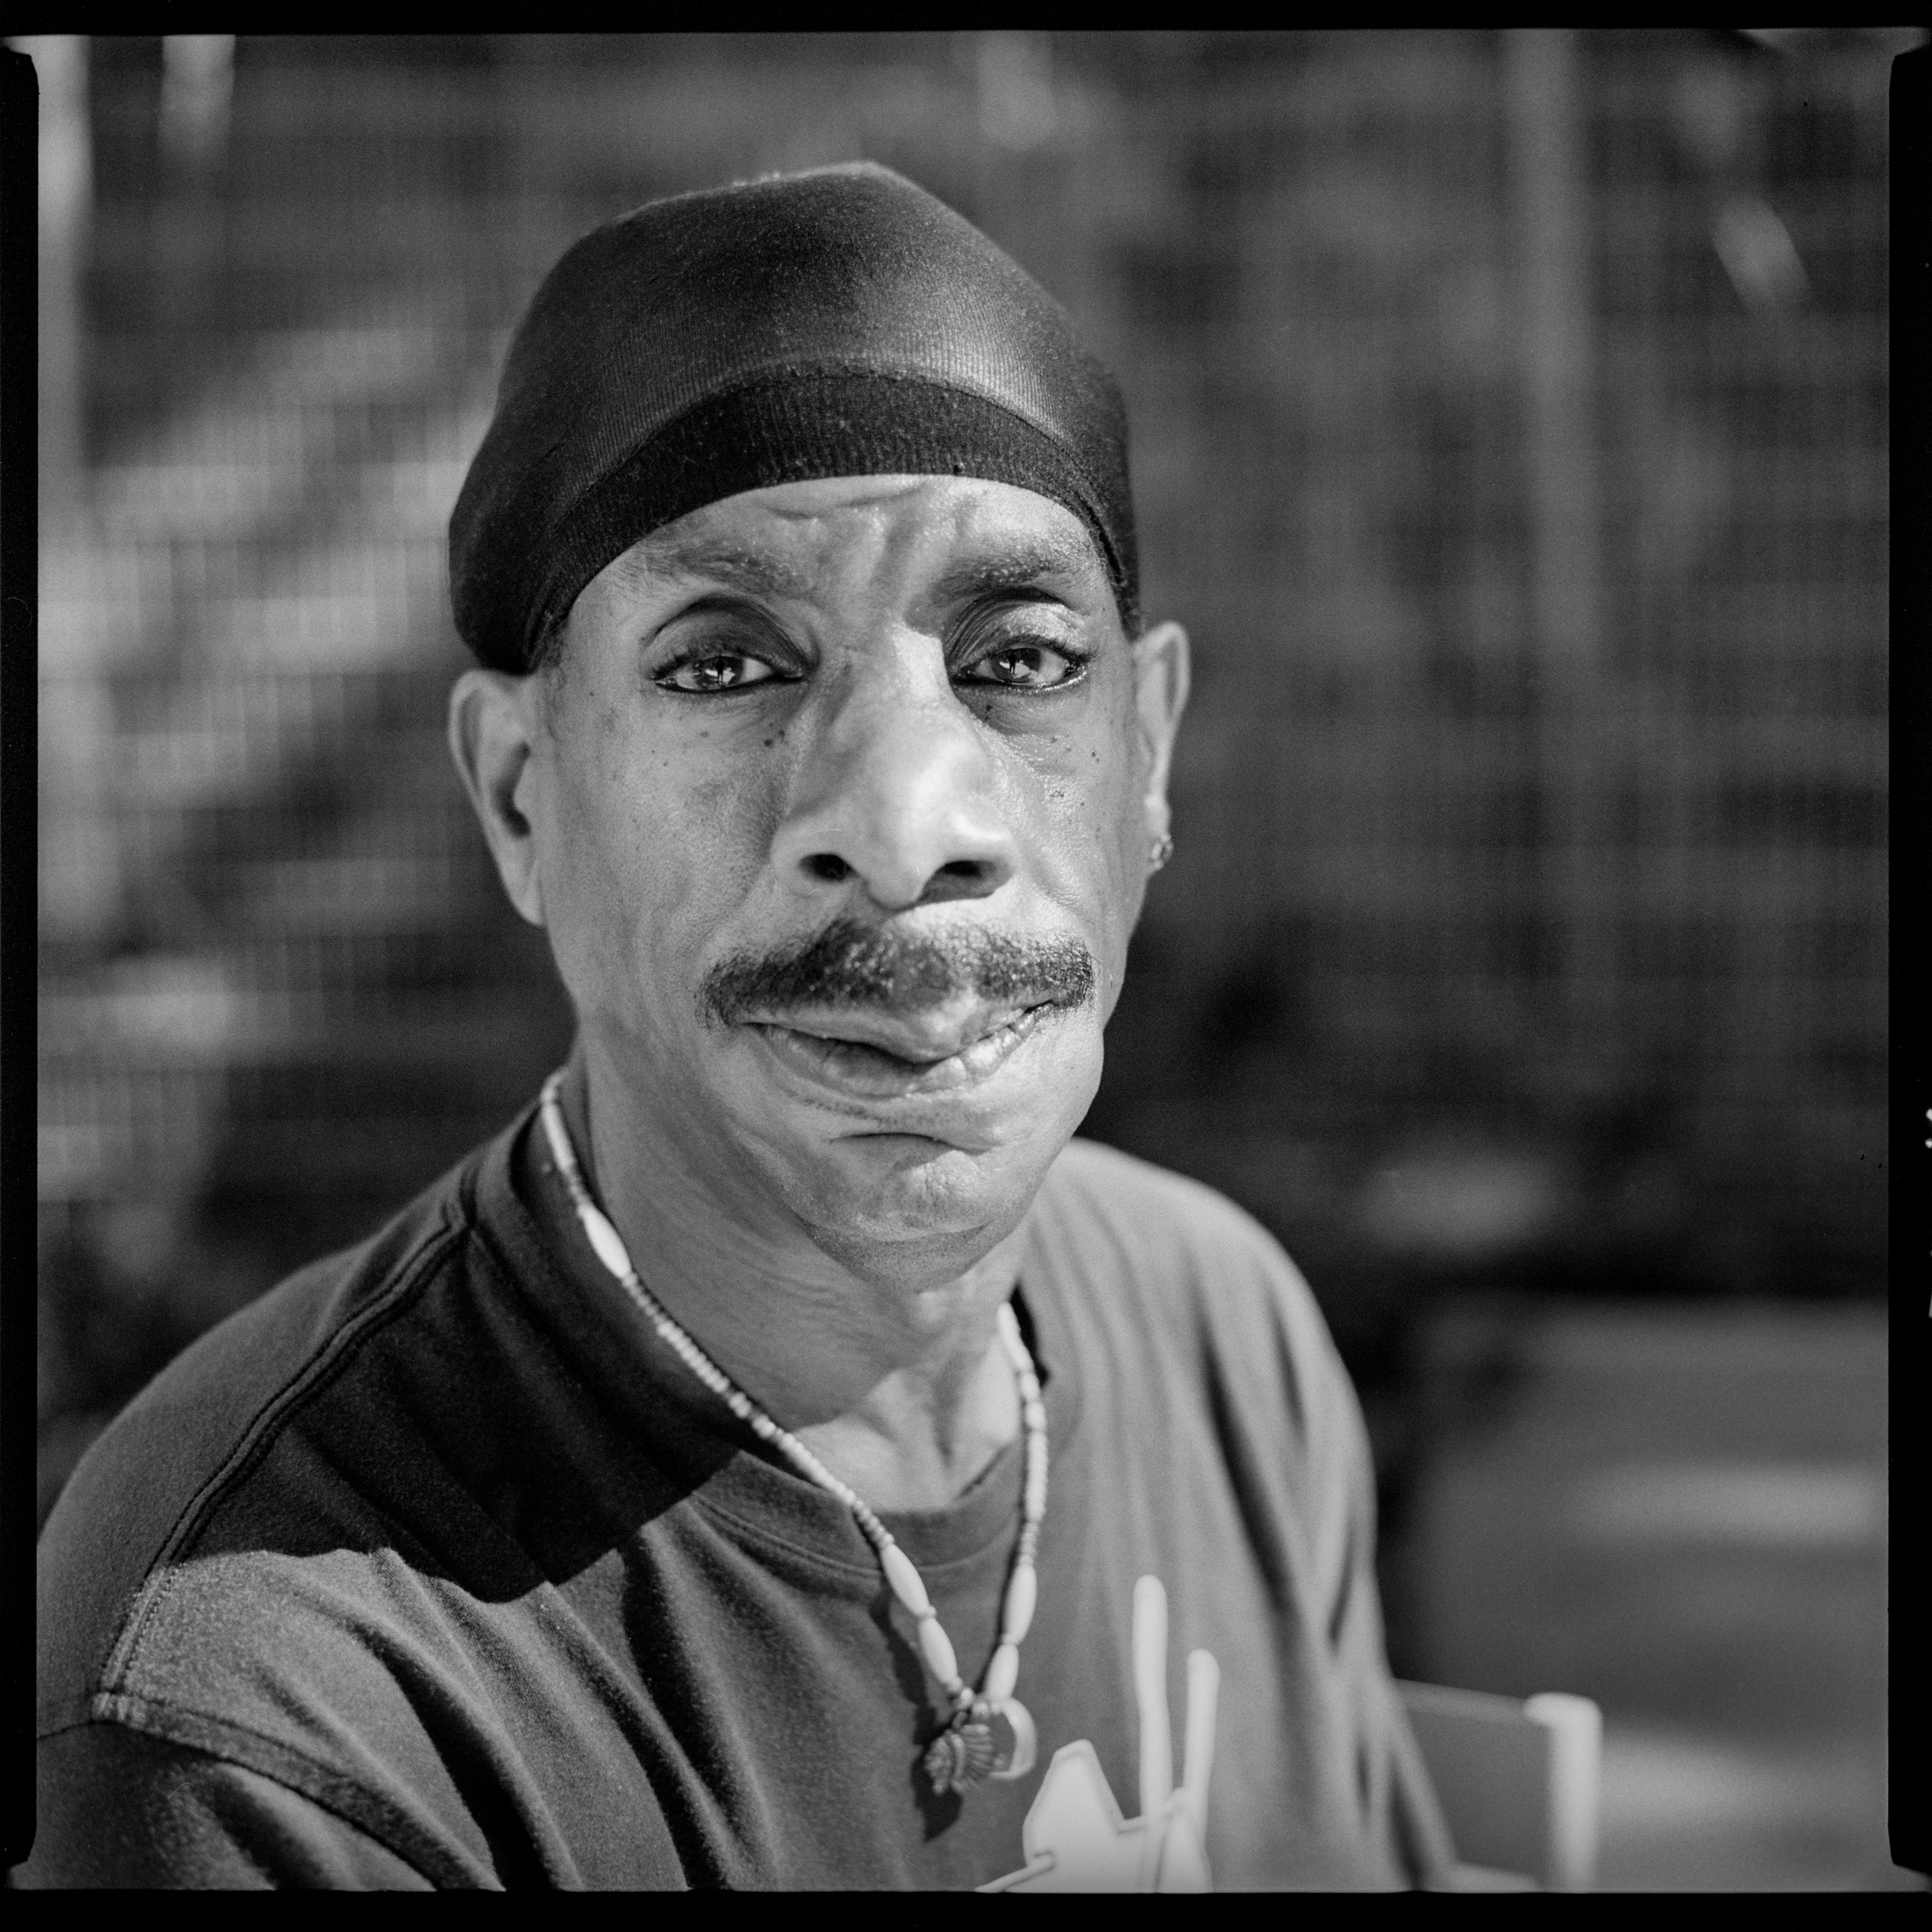 Image description: Black and white photograph of a black man with mustache, wearing a do rag, a T-shirt, and a bead necklace. He is looking into the camera, his eyes are lined with eyeshadow. His nose and jaw are asymmetrical as if from an injury.